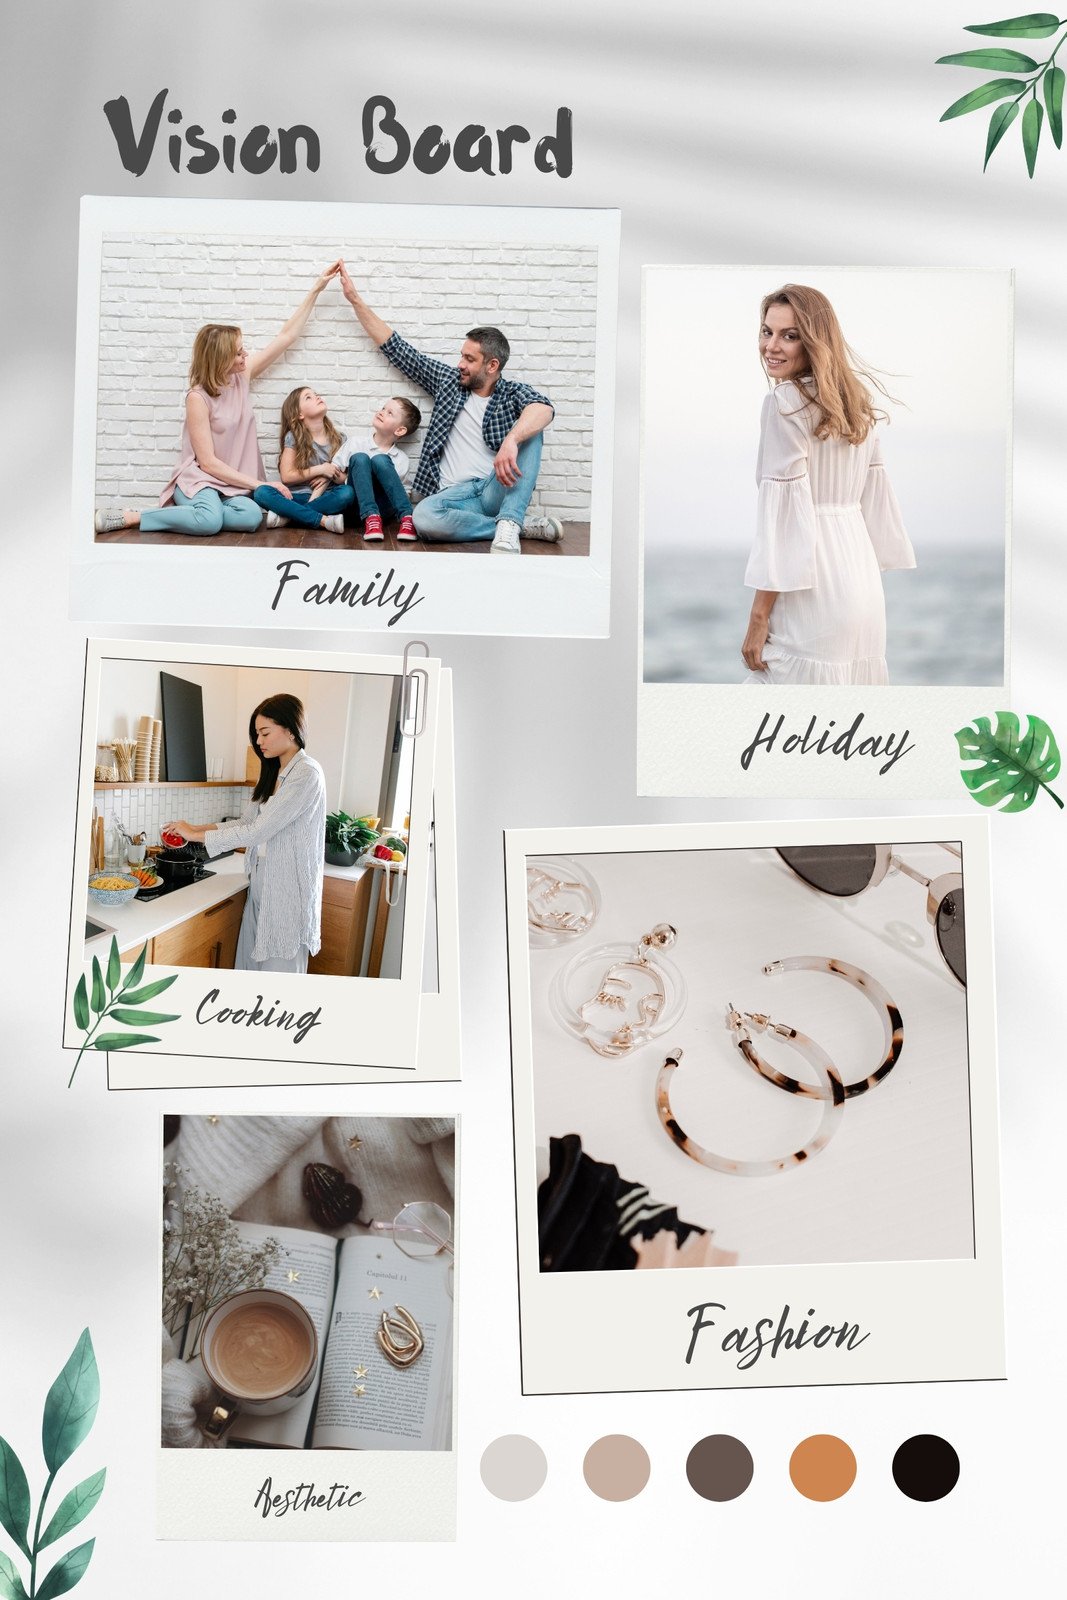 Page 2 - Free and customizable vision board templates